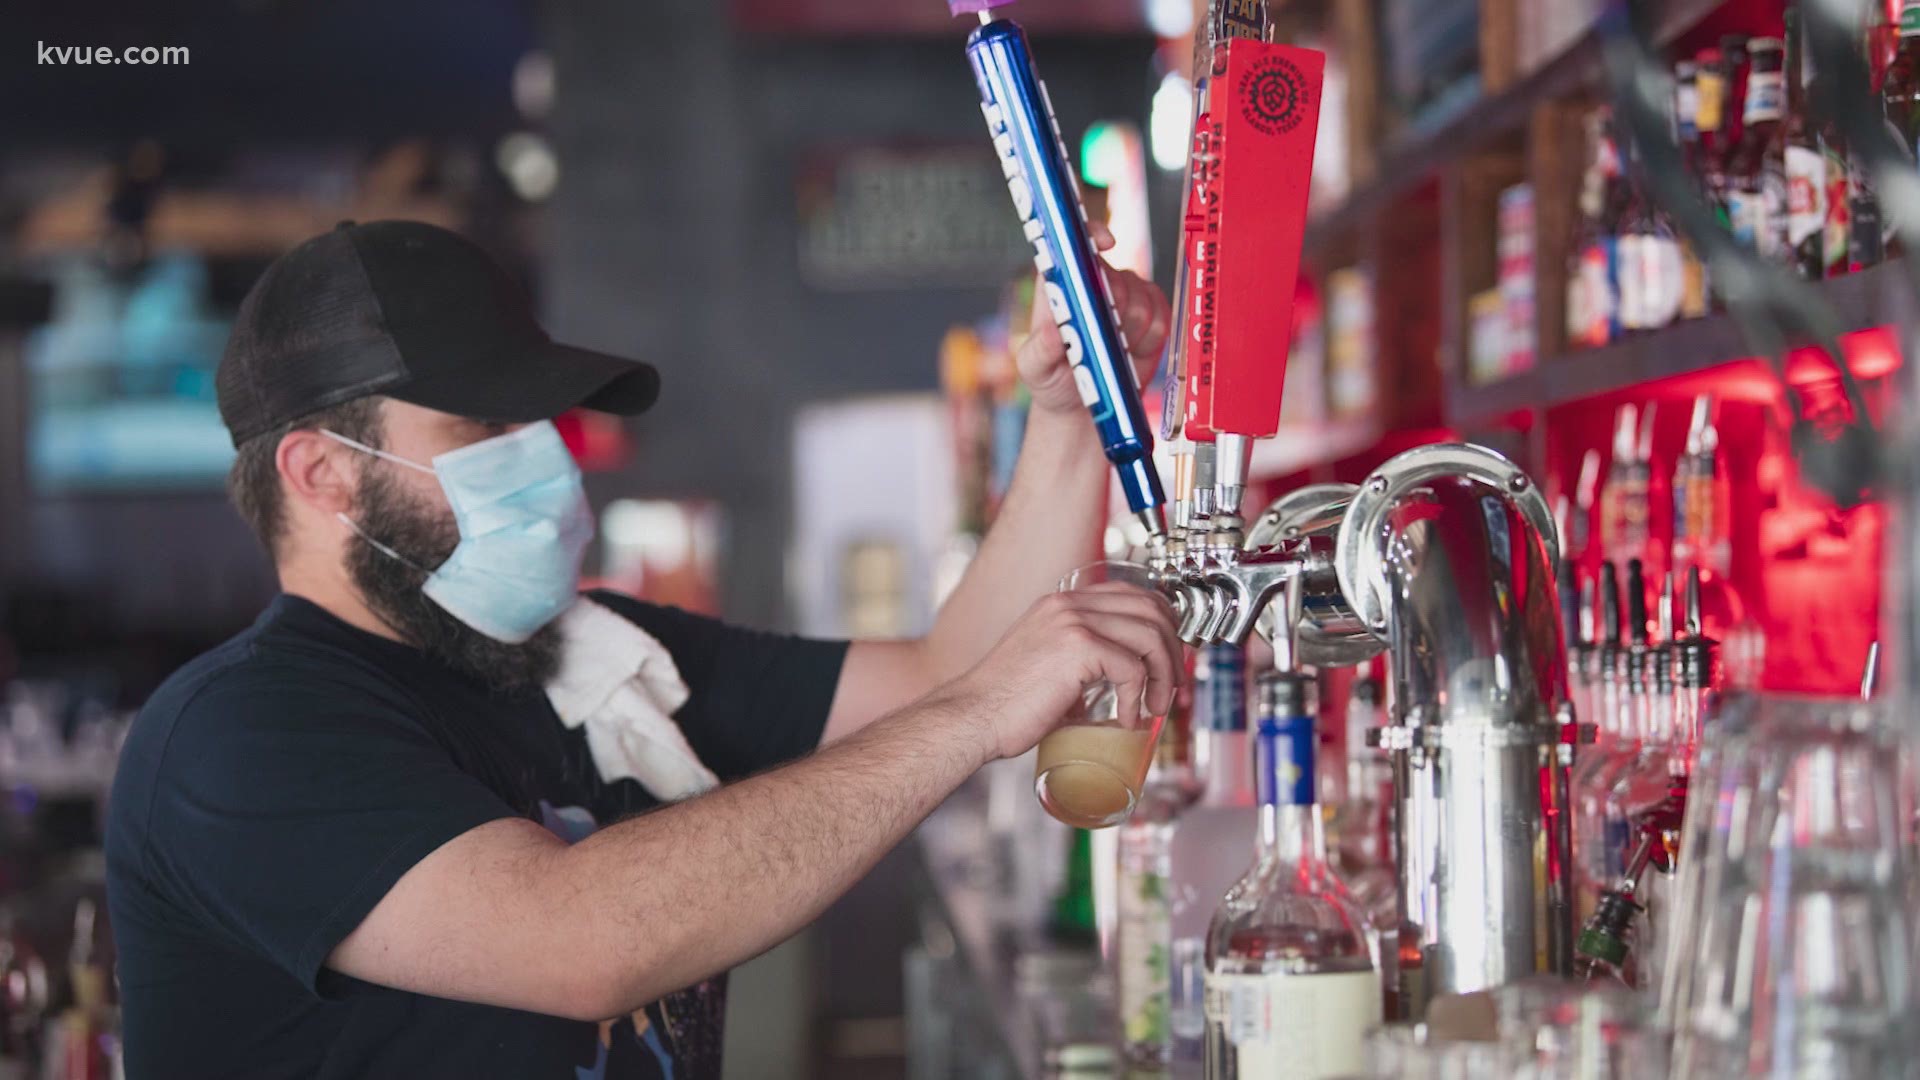 On Wednesday, Gov. Greg Abbott announced that Texas bars can open at 50% capacity starting Oct. 14, provided that county judges opt in with the TABC.